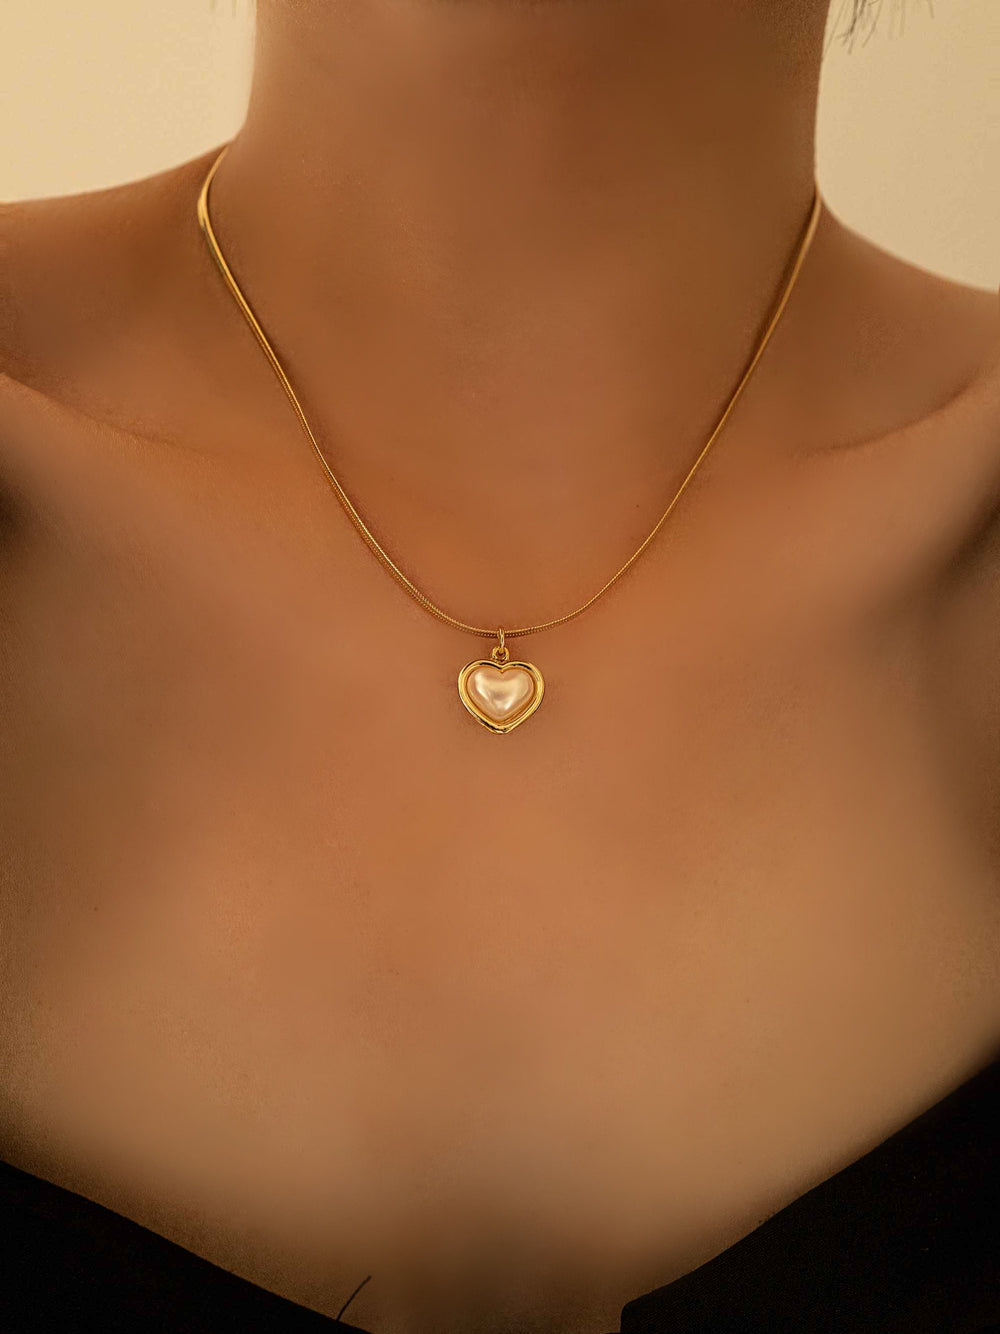 model with A love pendant necklace